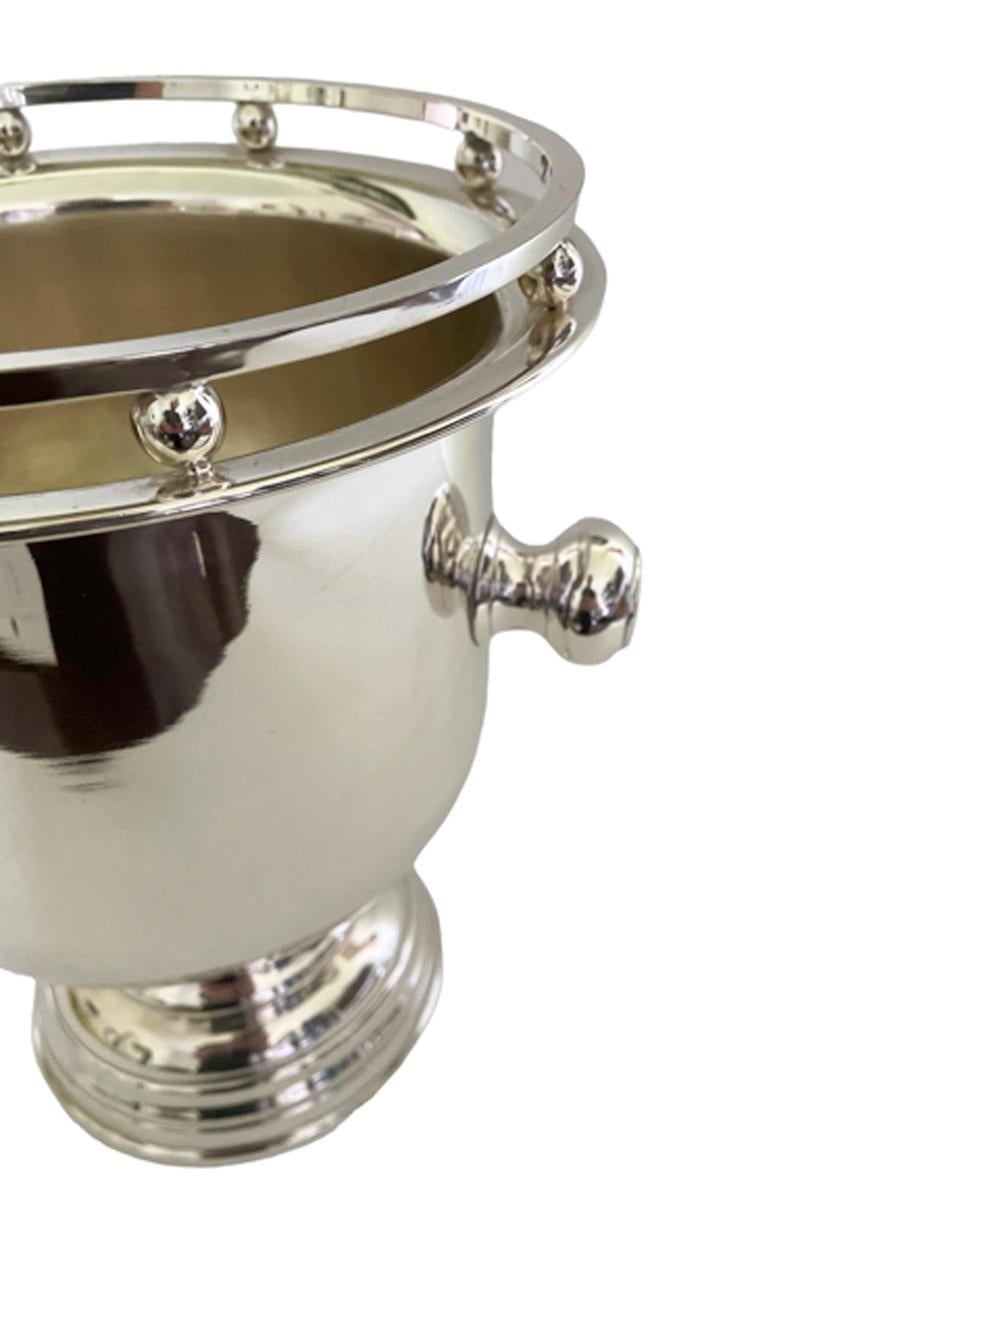 20th Century Midcentury Silver Plate Pedestaled Wine / Champagne Bucket W/Galleried Rim For Sale